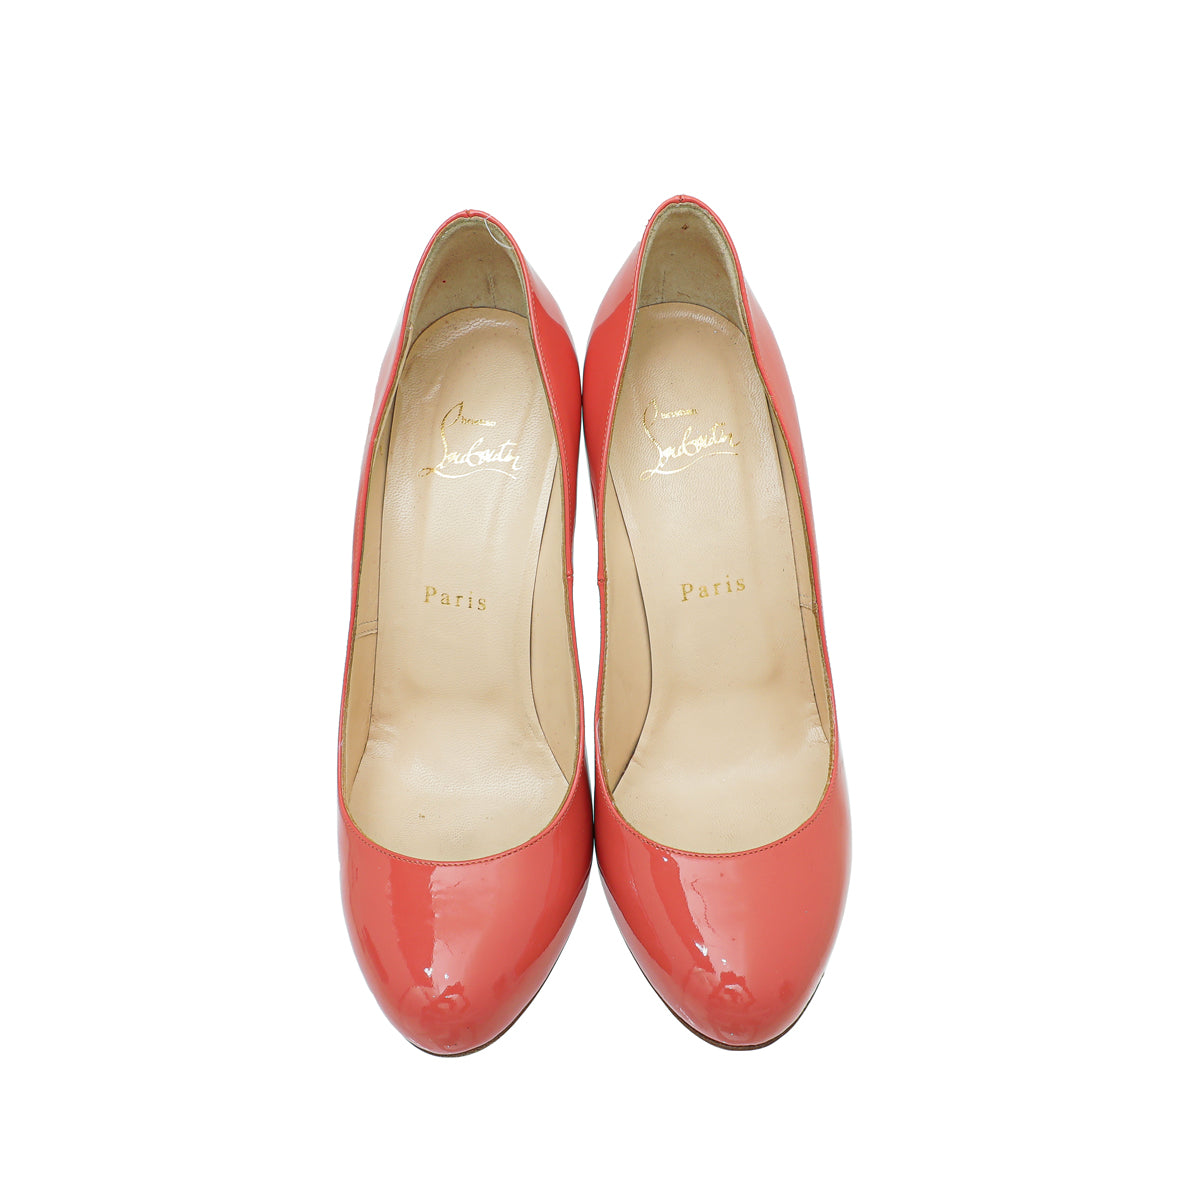 Christian Louboutin Coral Simple 100 Pumps 37.5